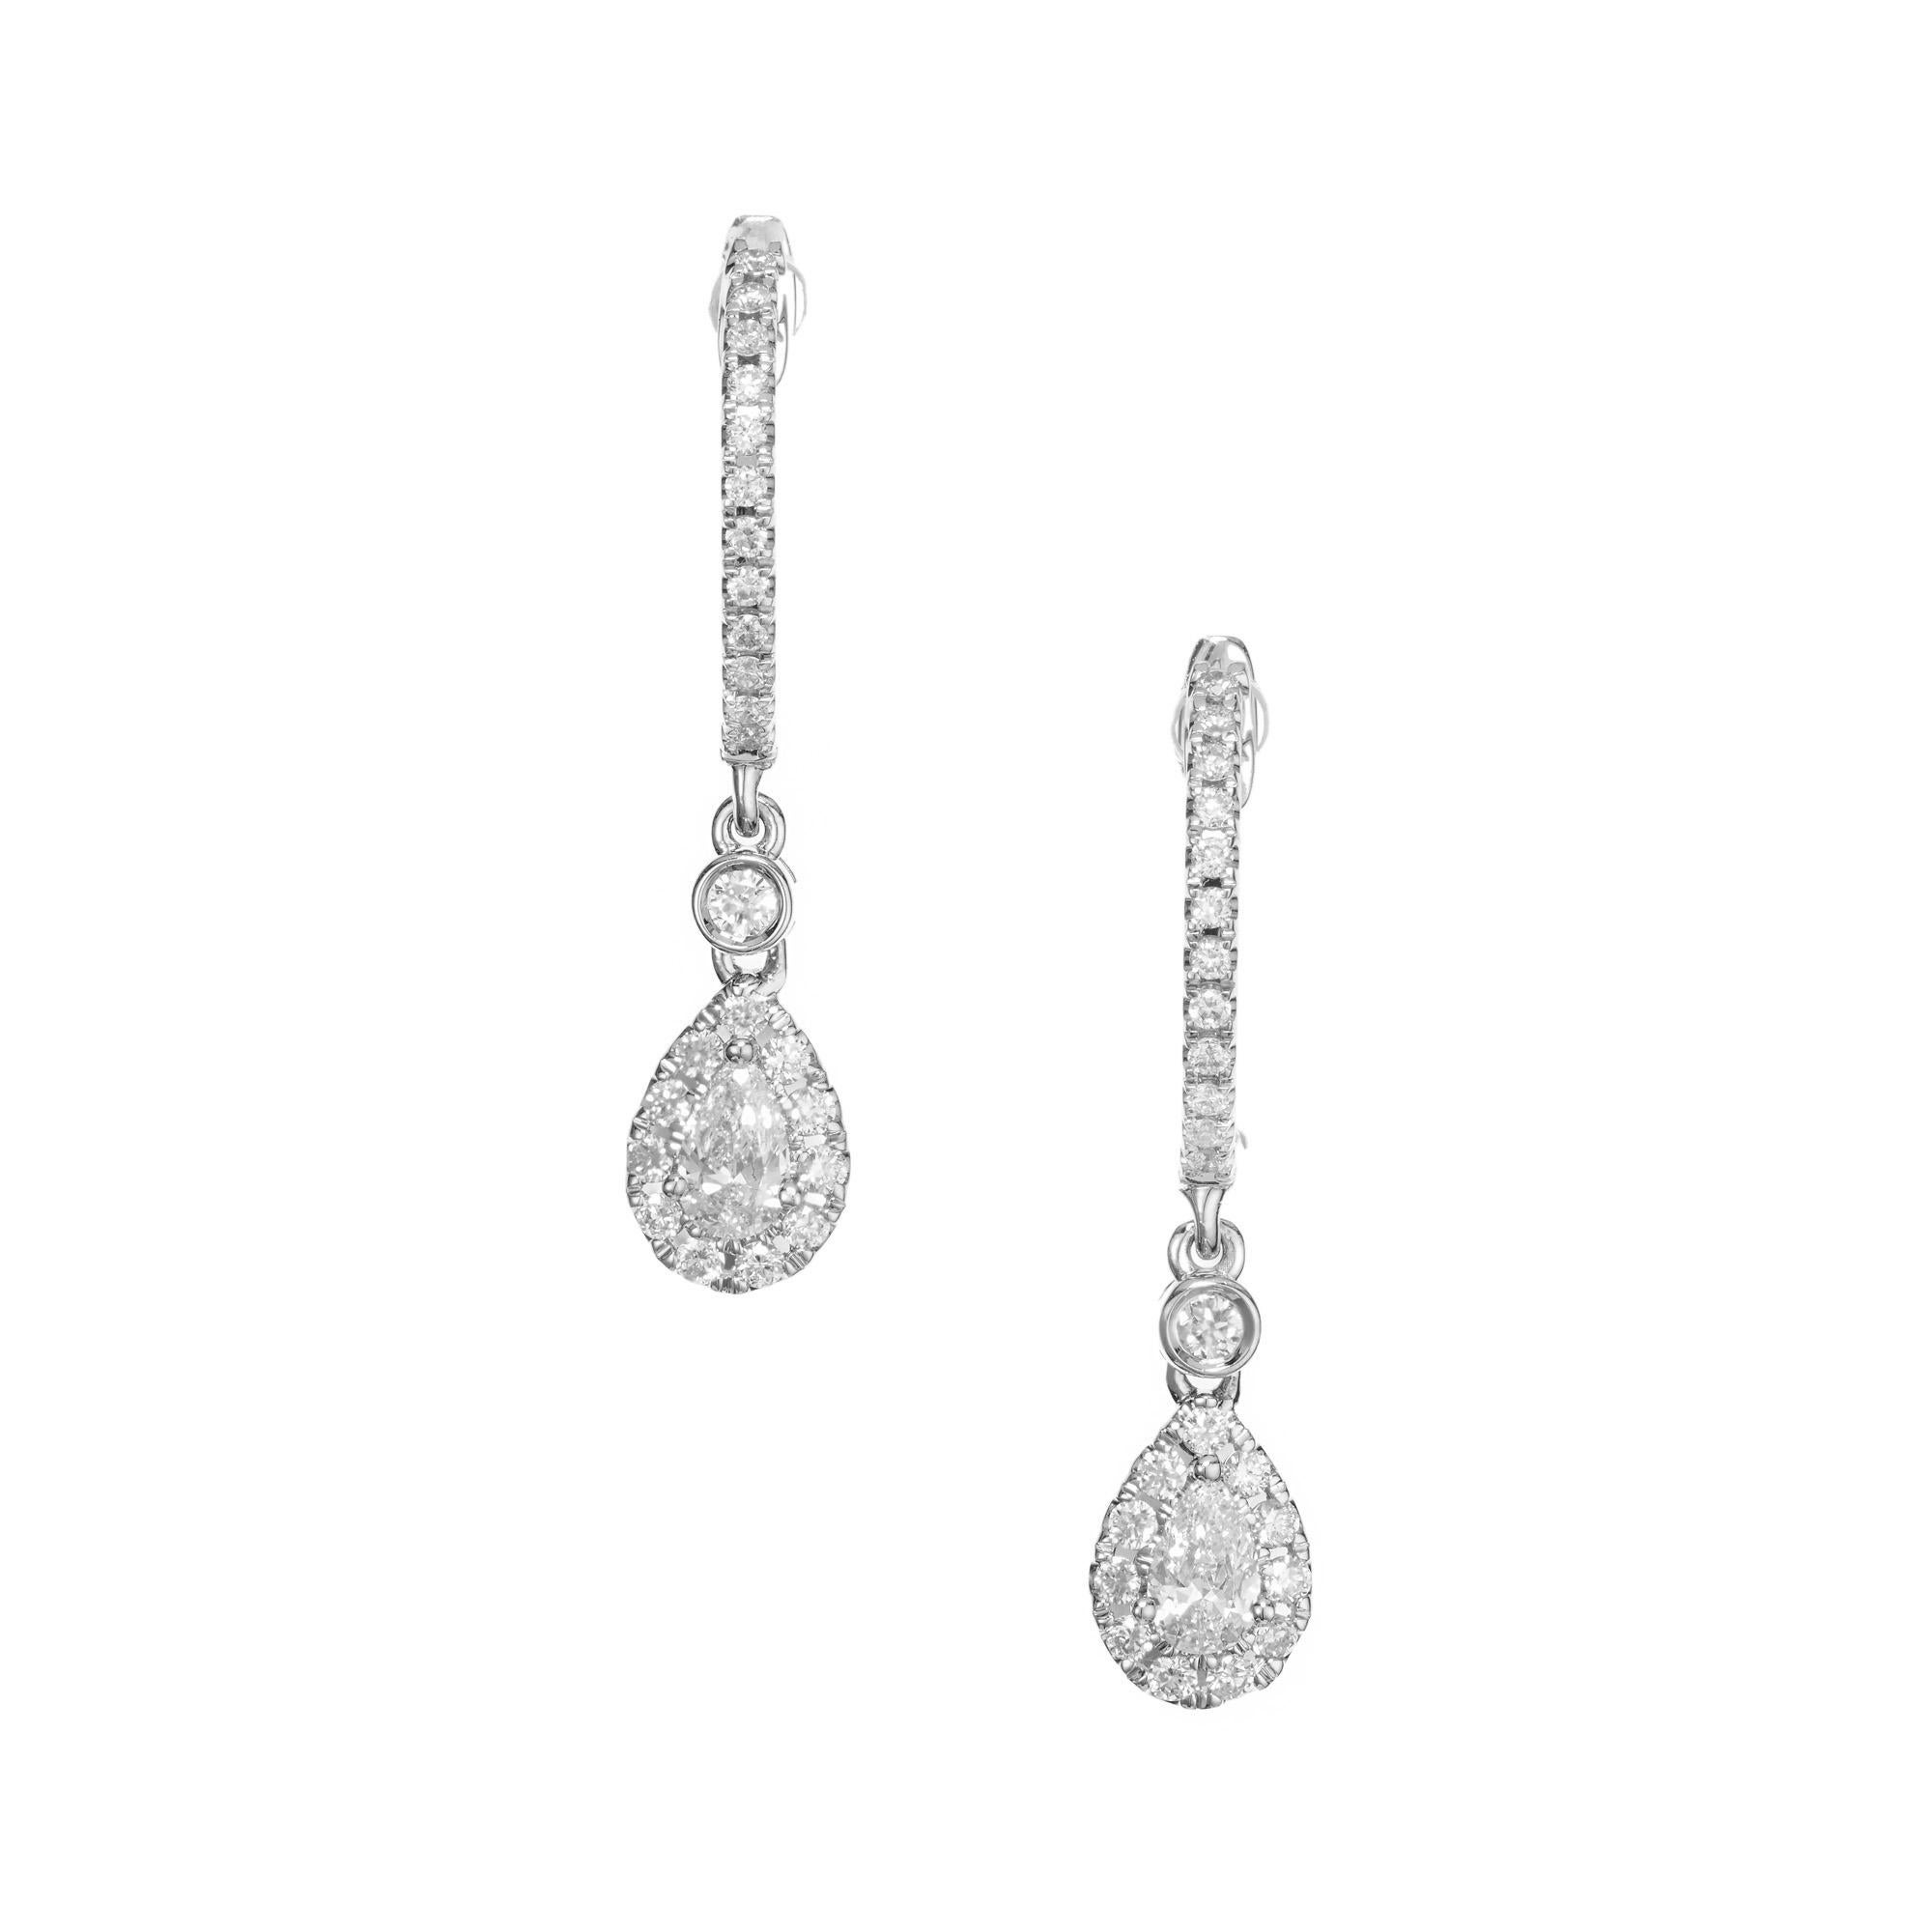 Diamond dangle hoop earrings. These simple but elegant earrings are made up of 2 pear shape diamonds totaling .24cts, each with a halo of round cut diamonds, connected to lever back hoop by a single bezel set round diamond. Both the fronts of each